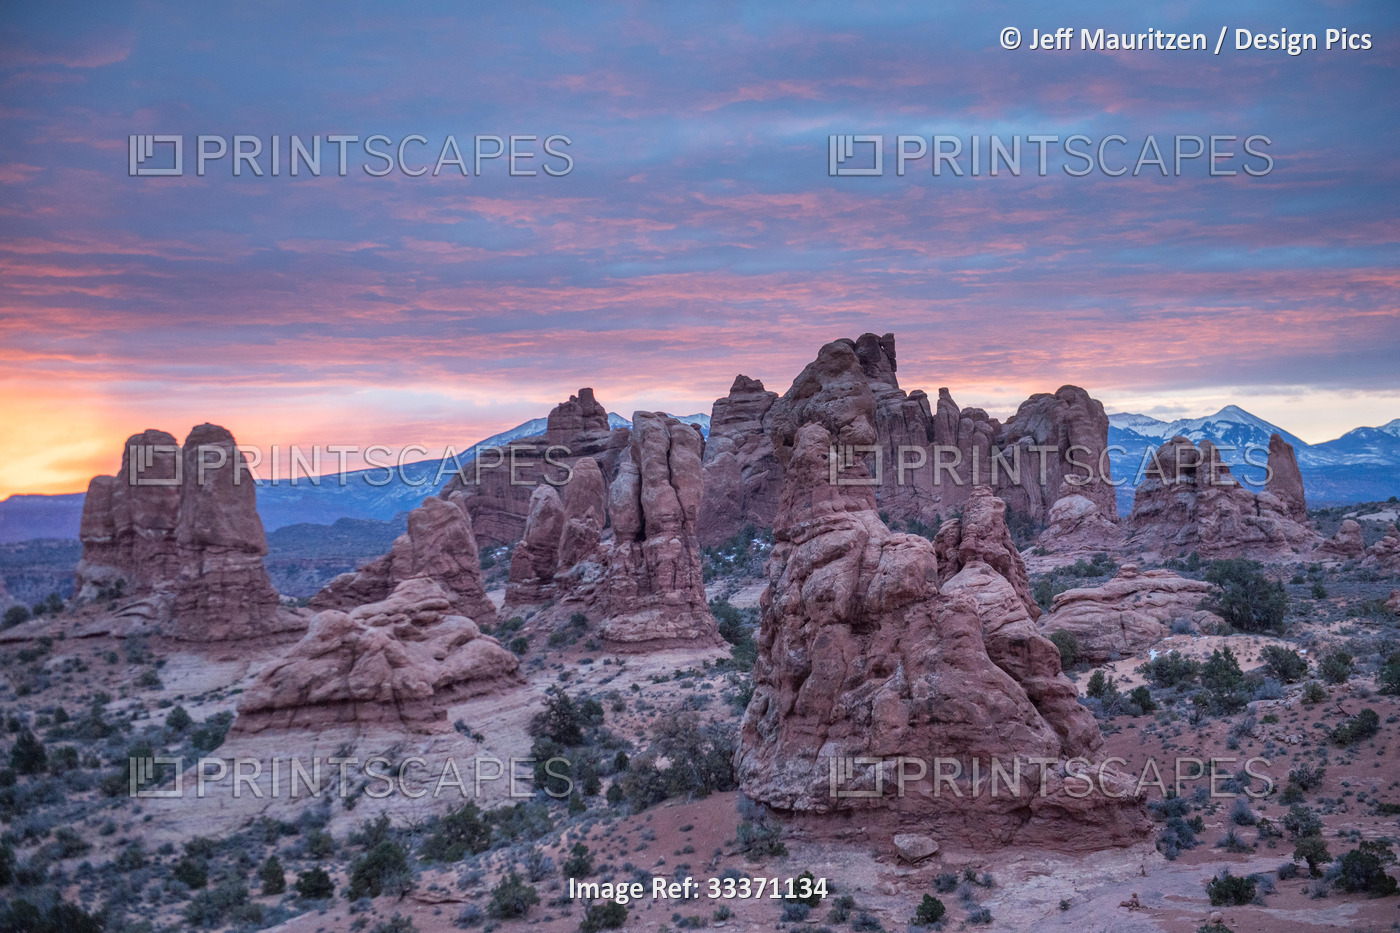 Sunrise in winter at Arches National Park, Utah.